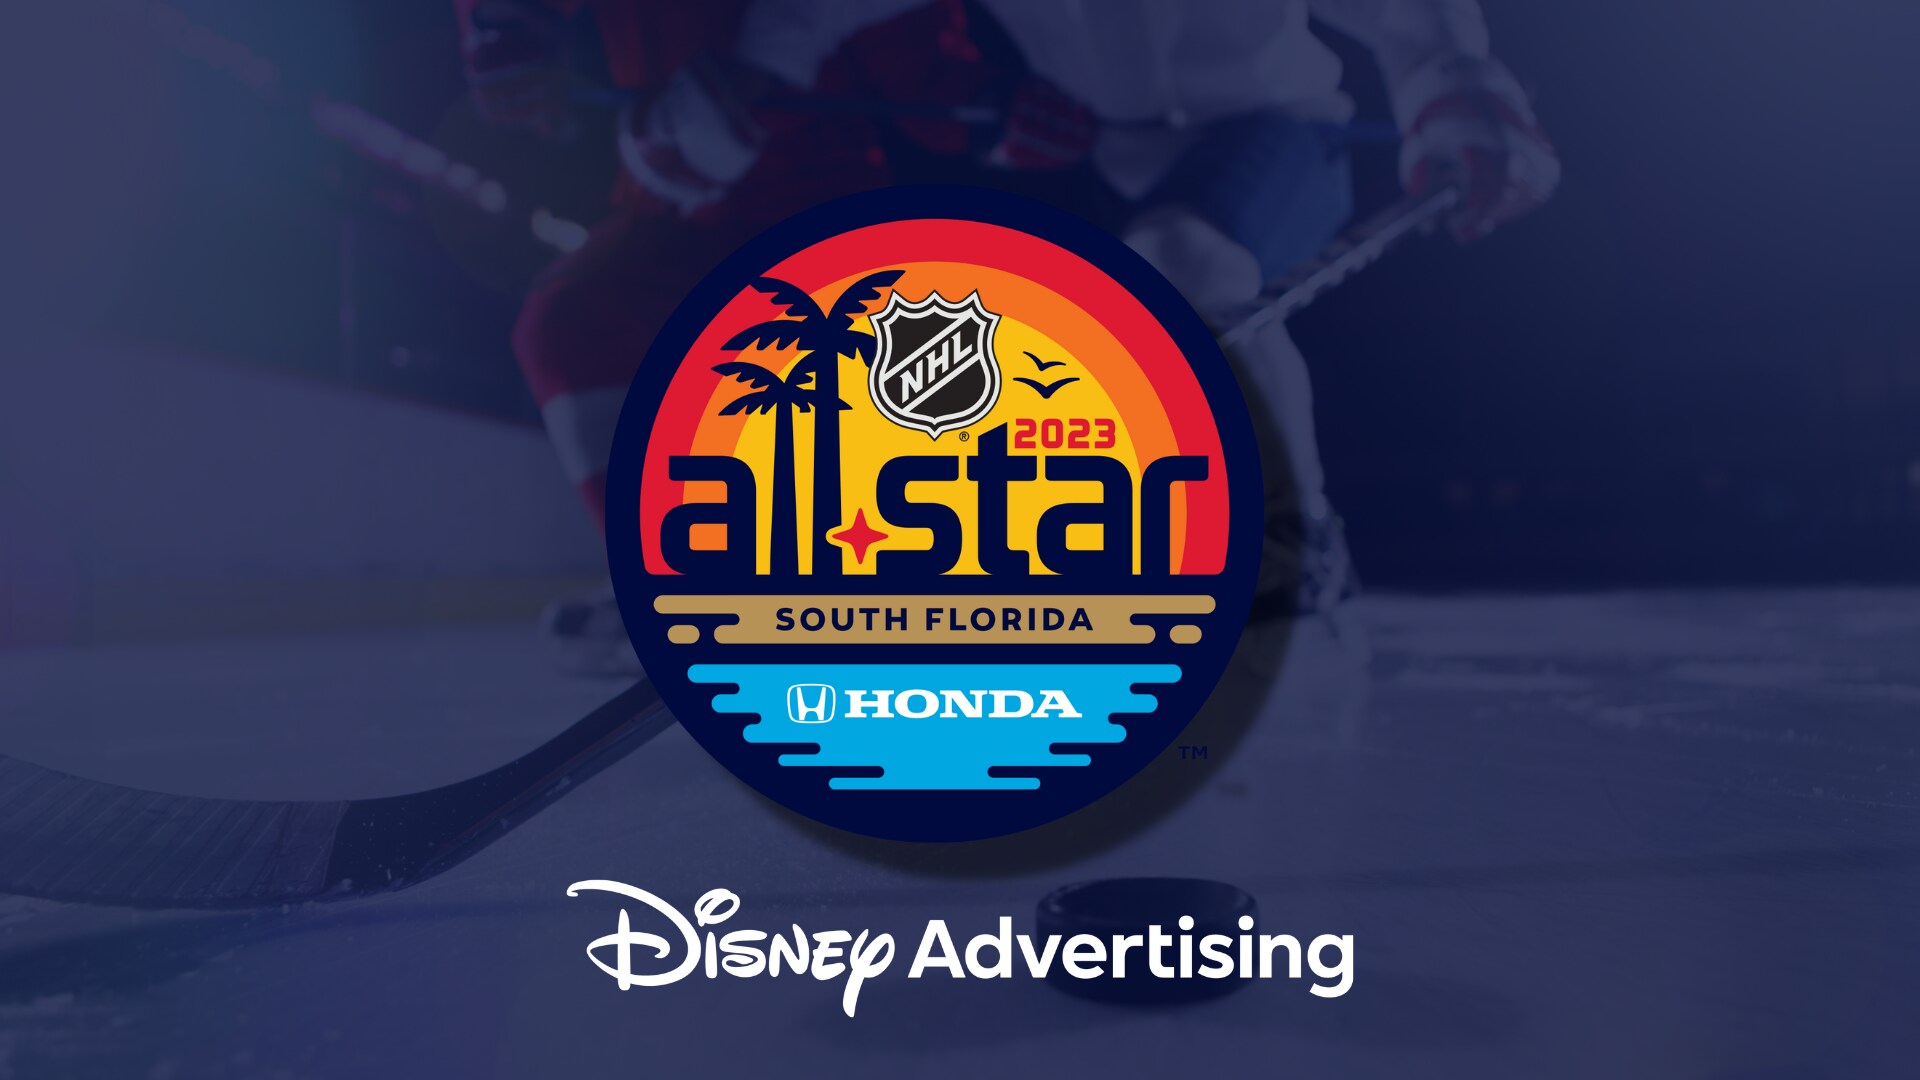 Disney Advertising Takes Ice with Sold-Out 2023 Honda NHL All-Star Game and 2023 NHL All-Star Skills 